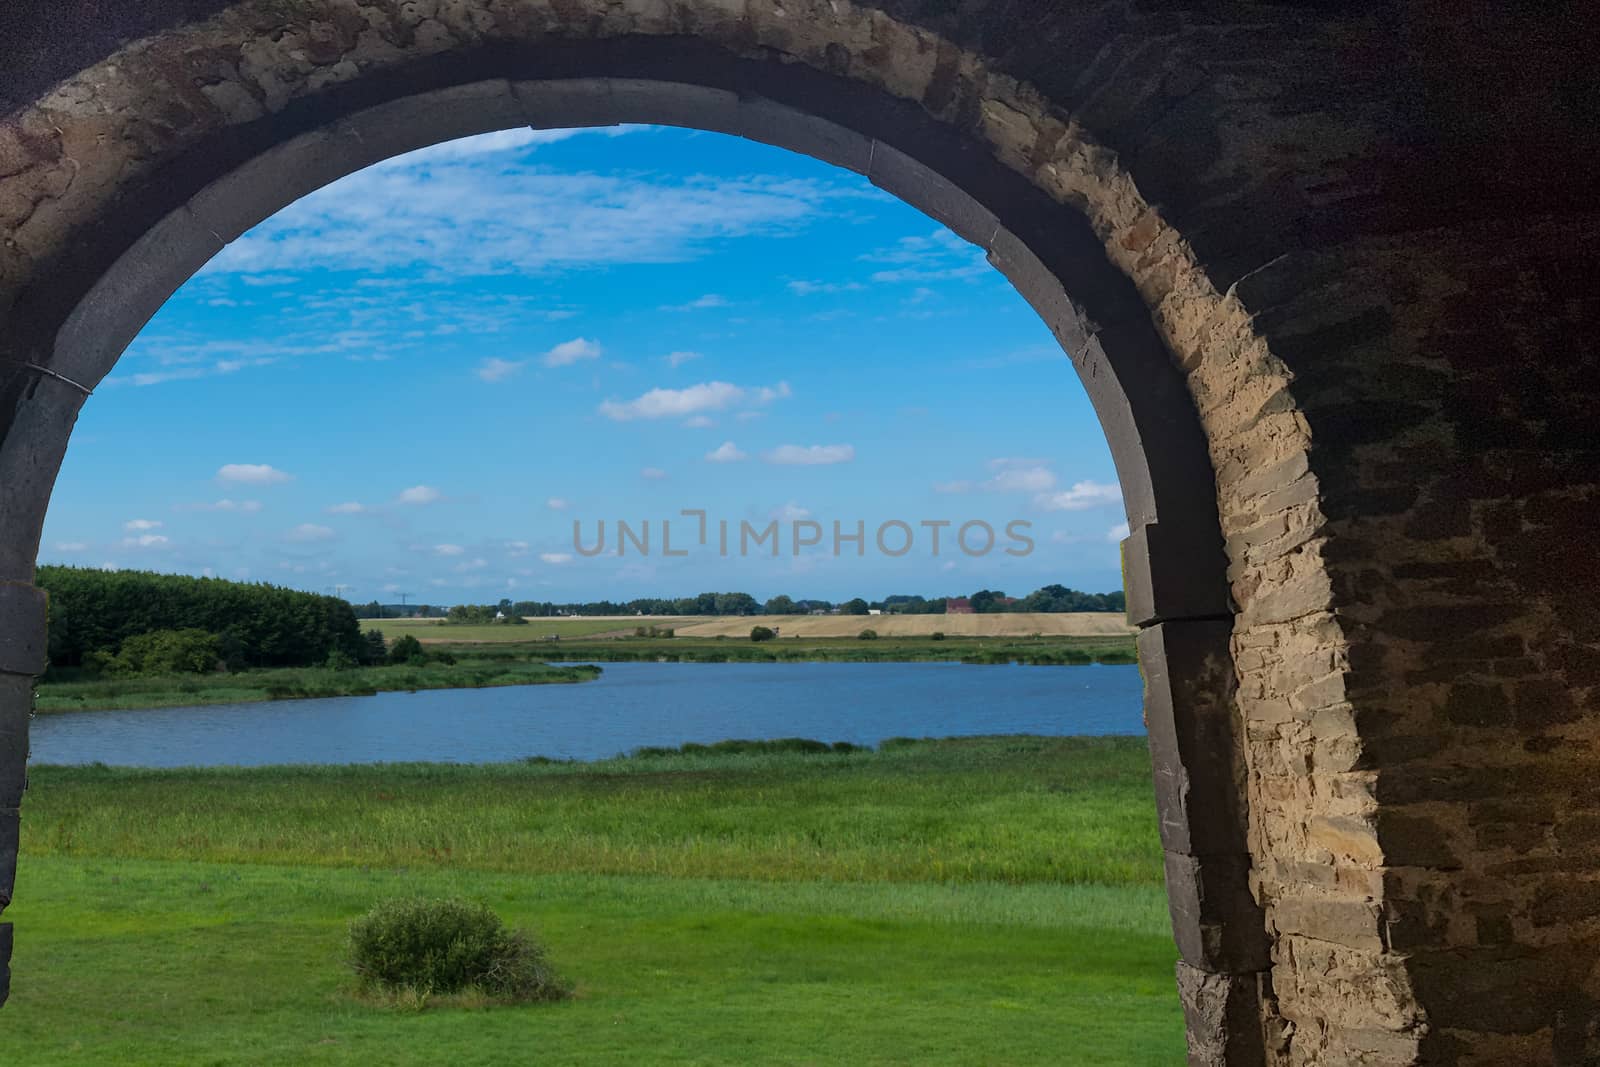 Panoramic view of the swimming, fishing and nature area Eixen lake. Shot looking through a door arch.